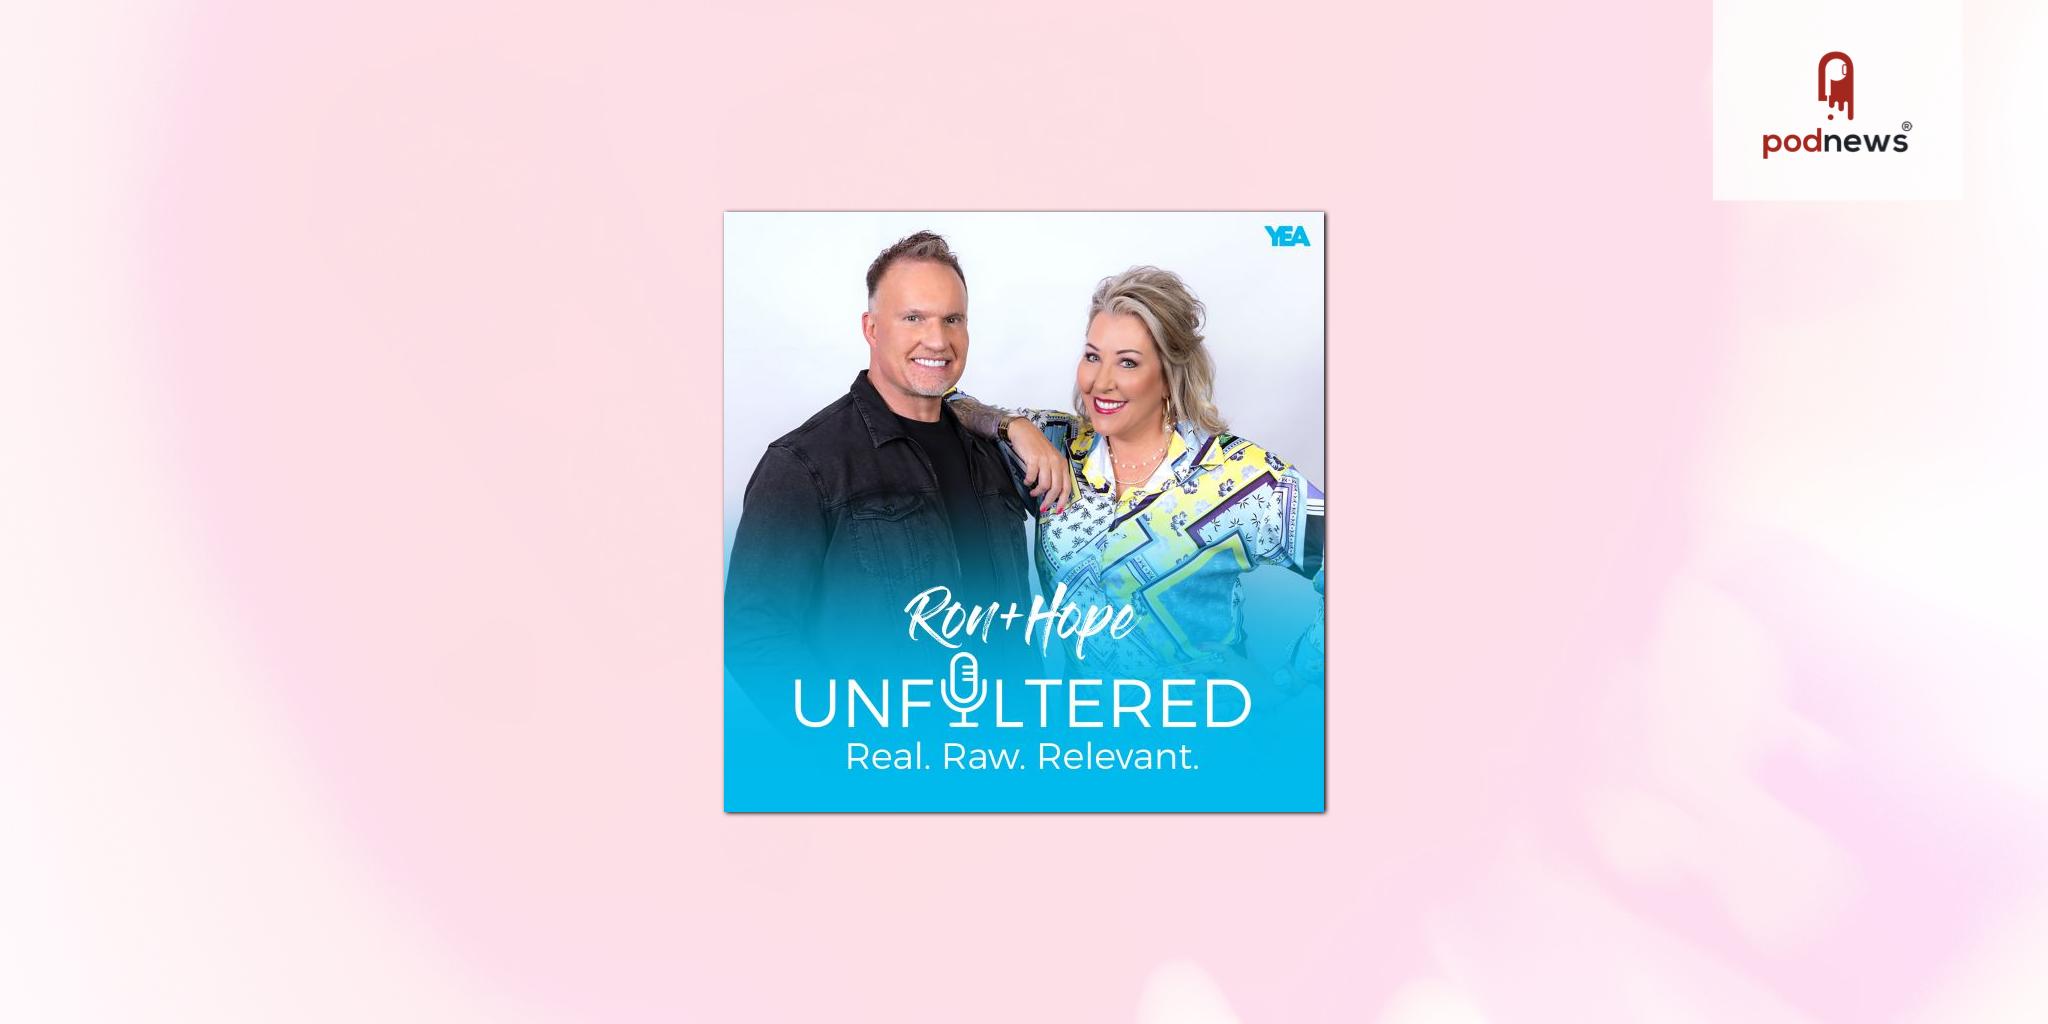 Ron and Hope Carpenter to Debut Podcast with YEA Networks